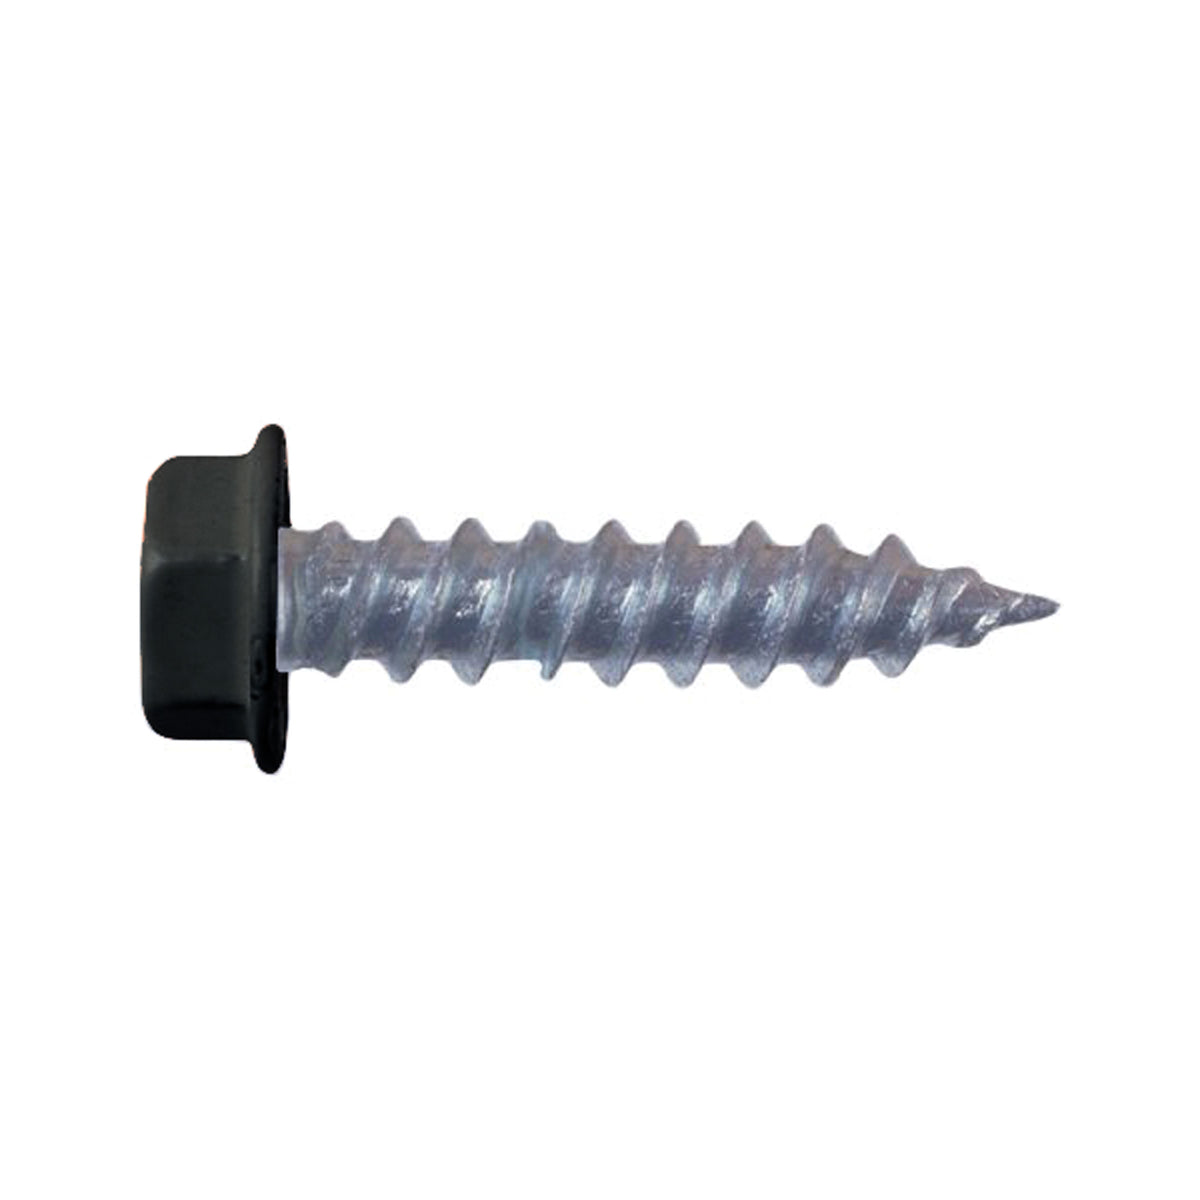 AP Products 012-TR50 BL 8 X 1-1/2 Black #8 Hex Washer Head Screw, 1-1/2" / Pack of 50